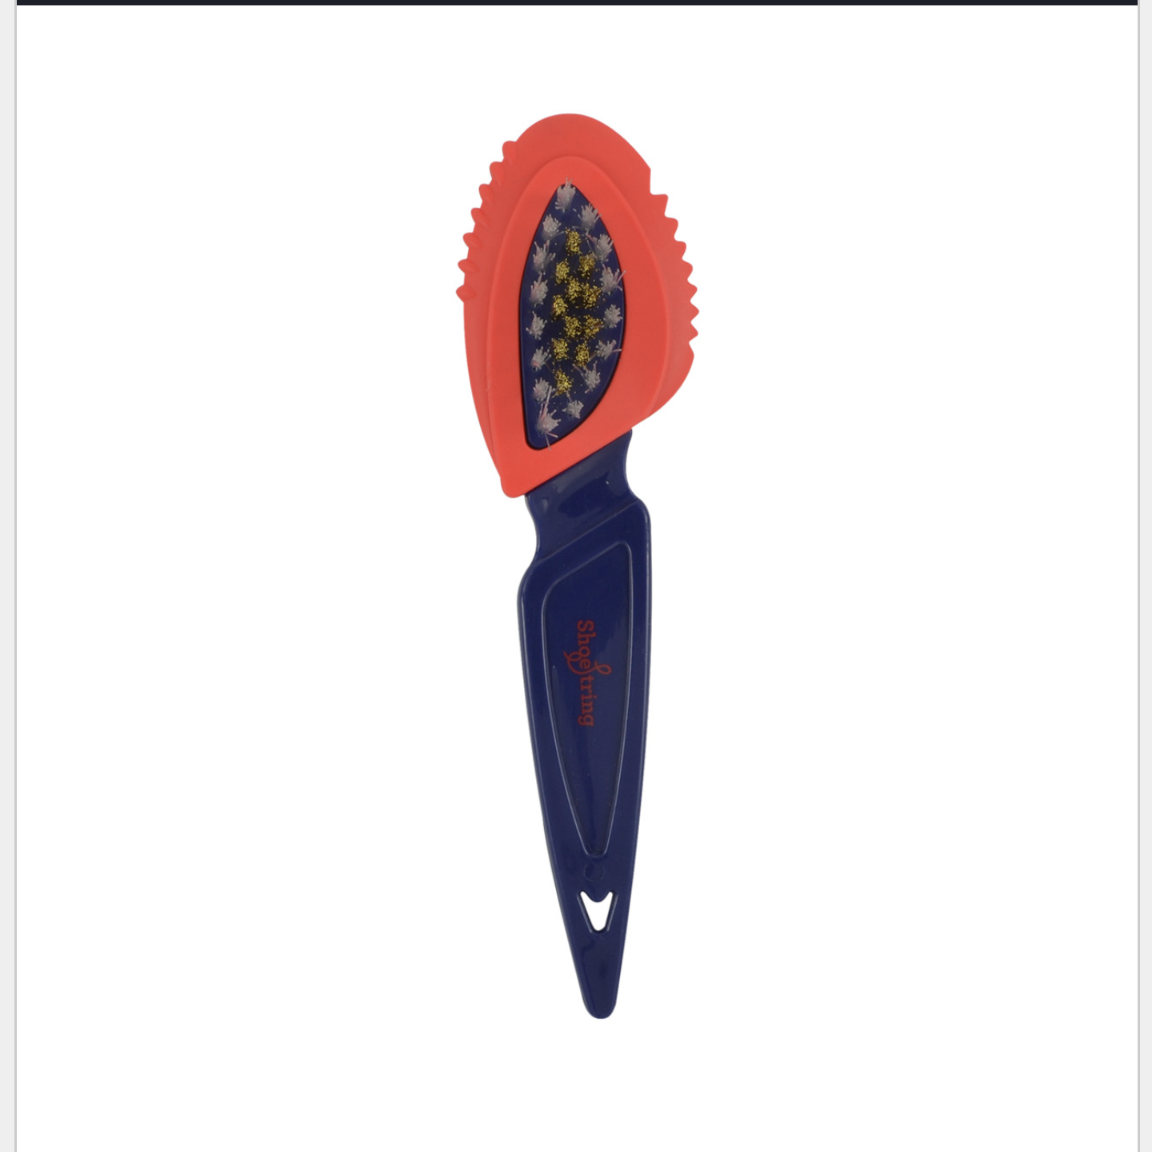 Image of a red and blue ShoeString suede brush.